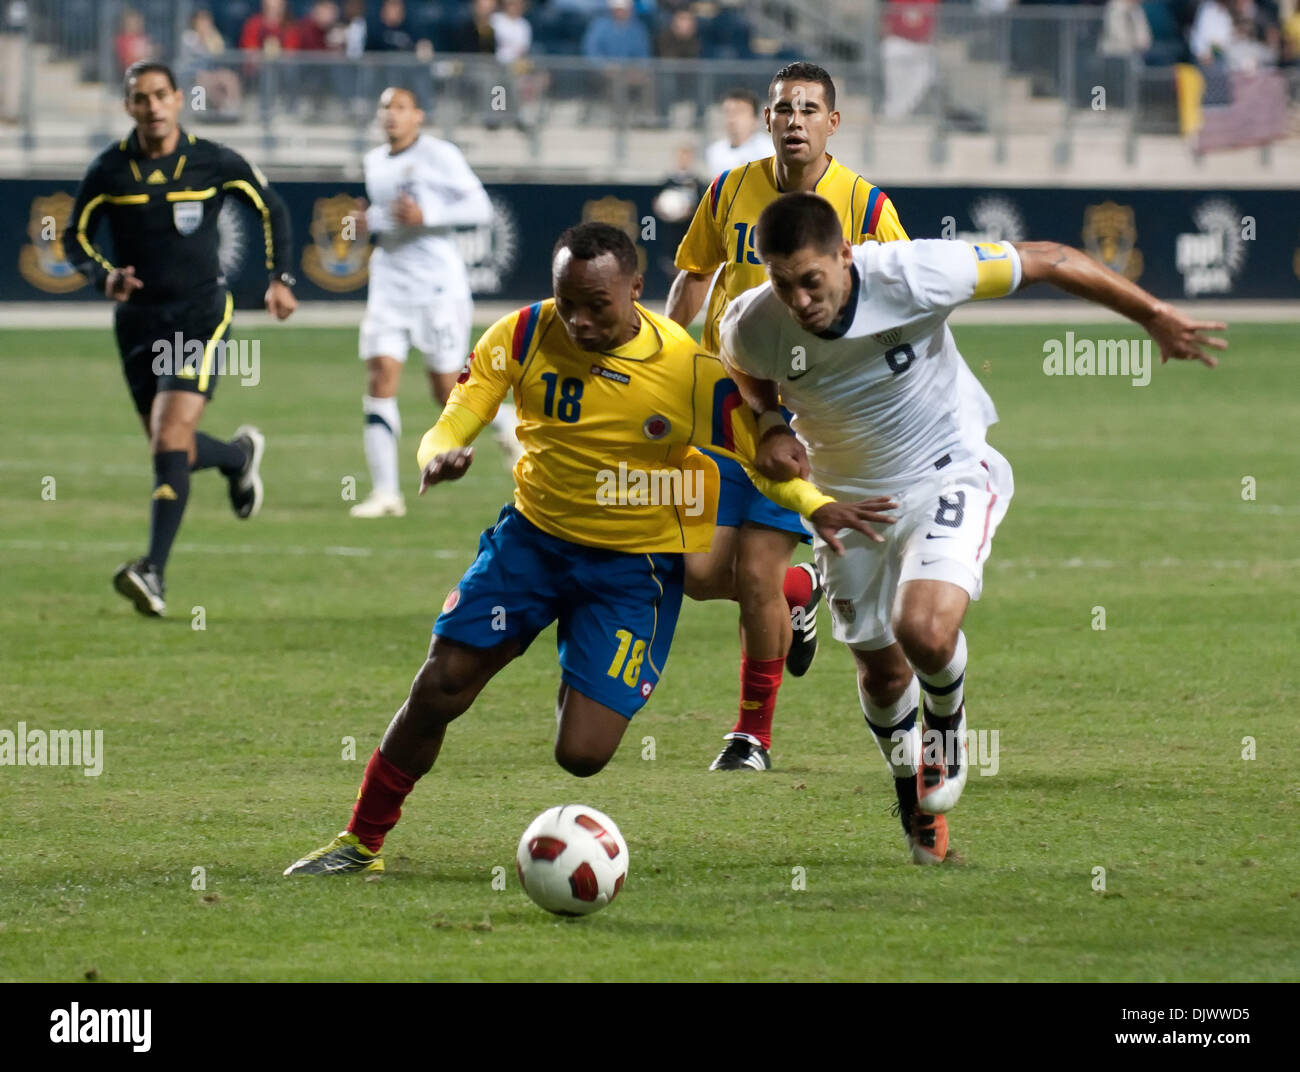 Oct 12, 2010 - Chester, Pennsylvania, U.S. - MLS Soccer - USA'S CLINT DEMPSEY and Colombia's CAMILO ZUNIGA fight for the ball. The USA and Colombia played an International Friendly match at PPL Park in Chester. (Credit Image: © Ricky Fitchett/ZUMApress.com) Stock Photo